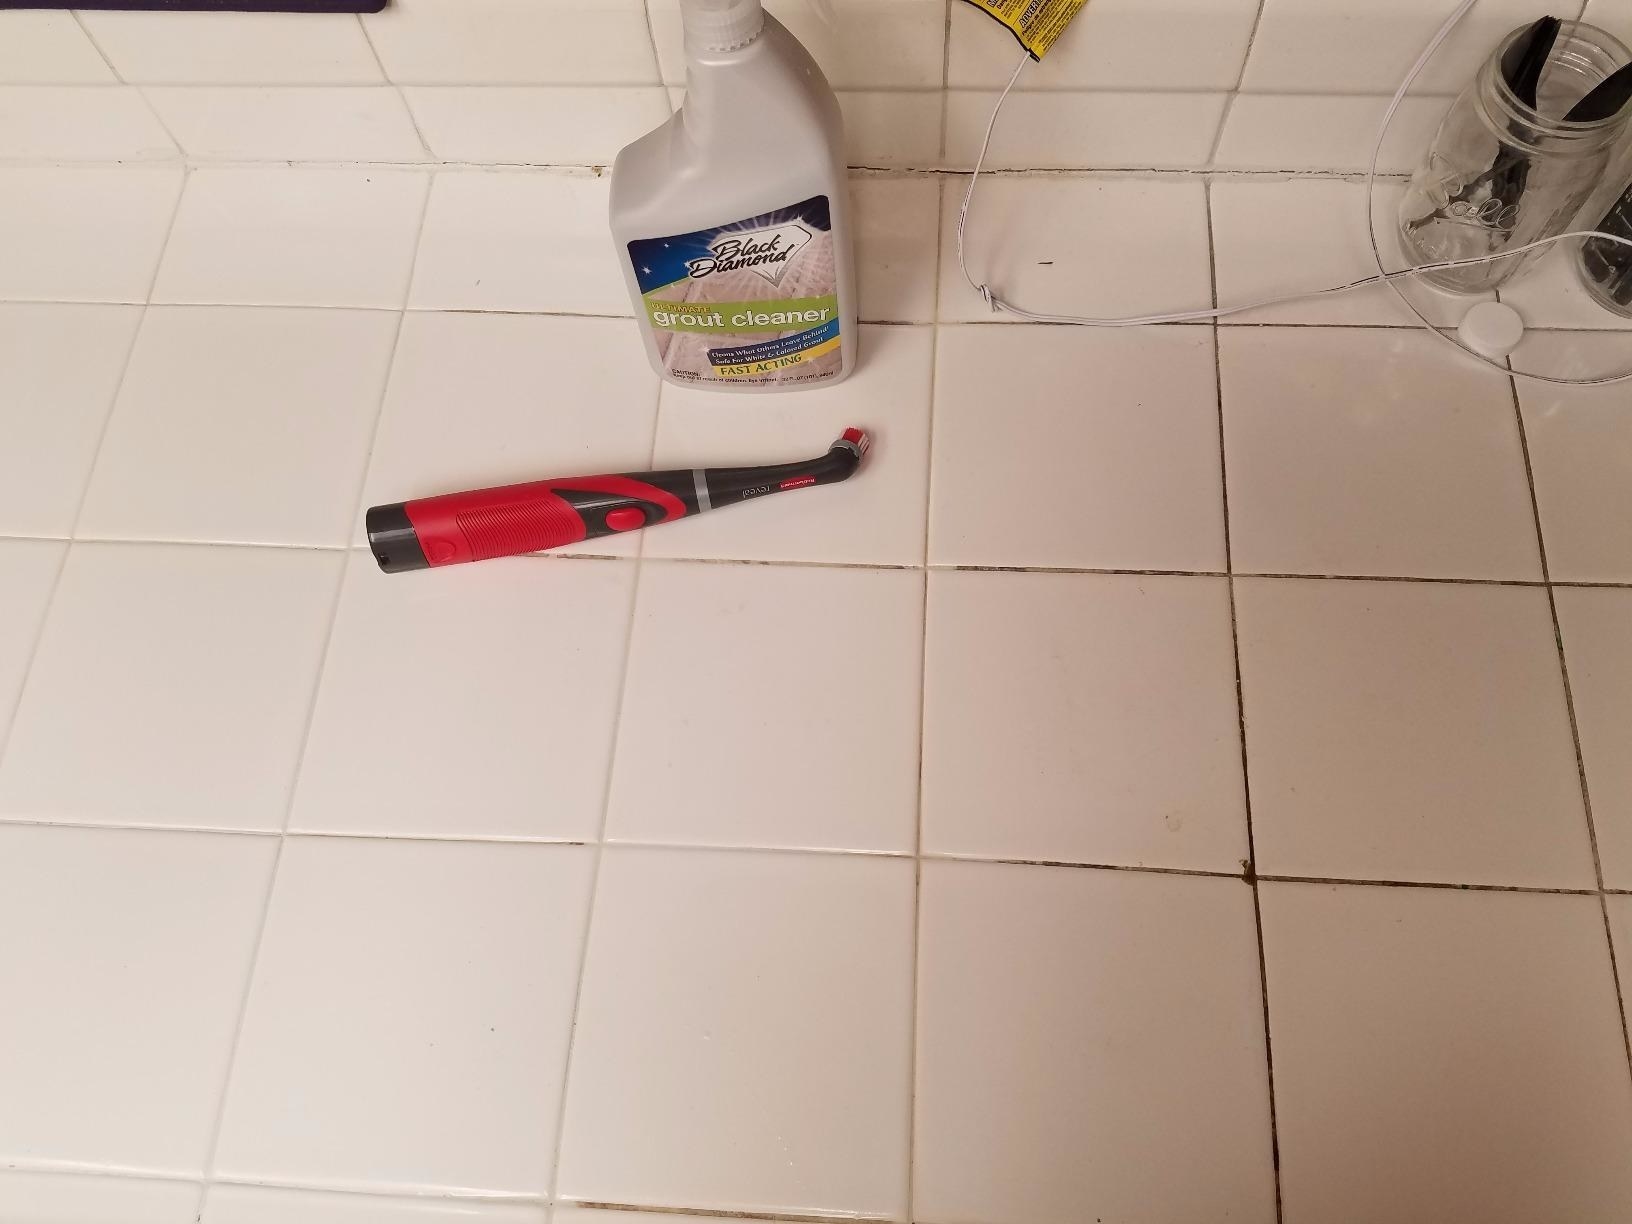 A review image of the scrubber on a half-cleaned surface, with dark, dirty grout before and clean grout after